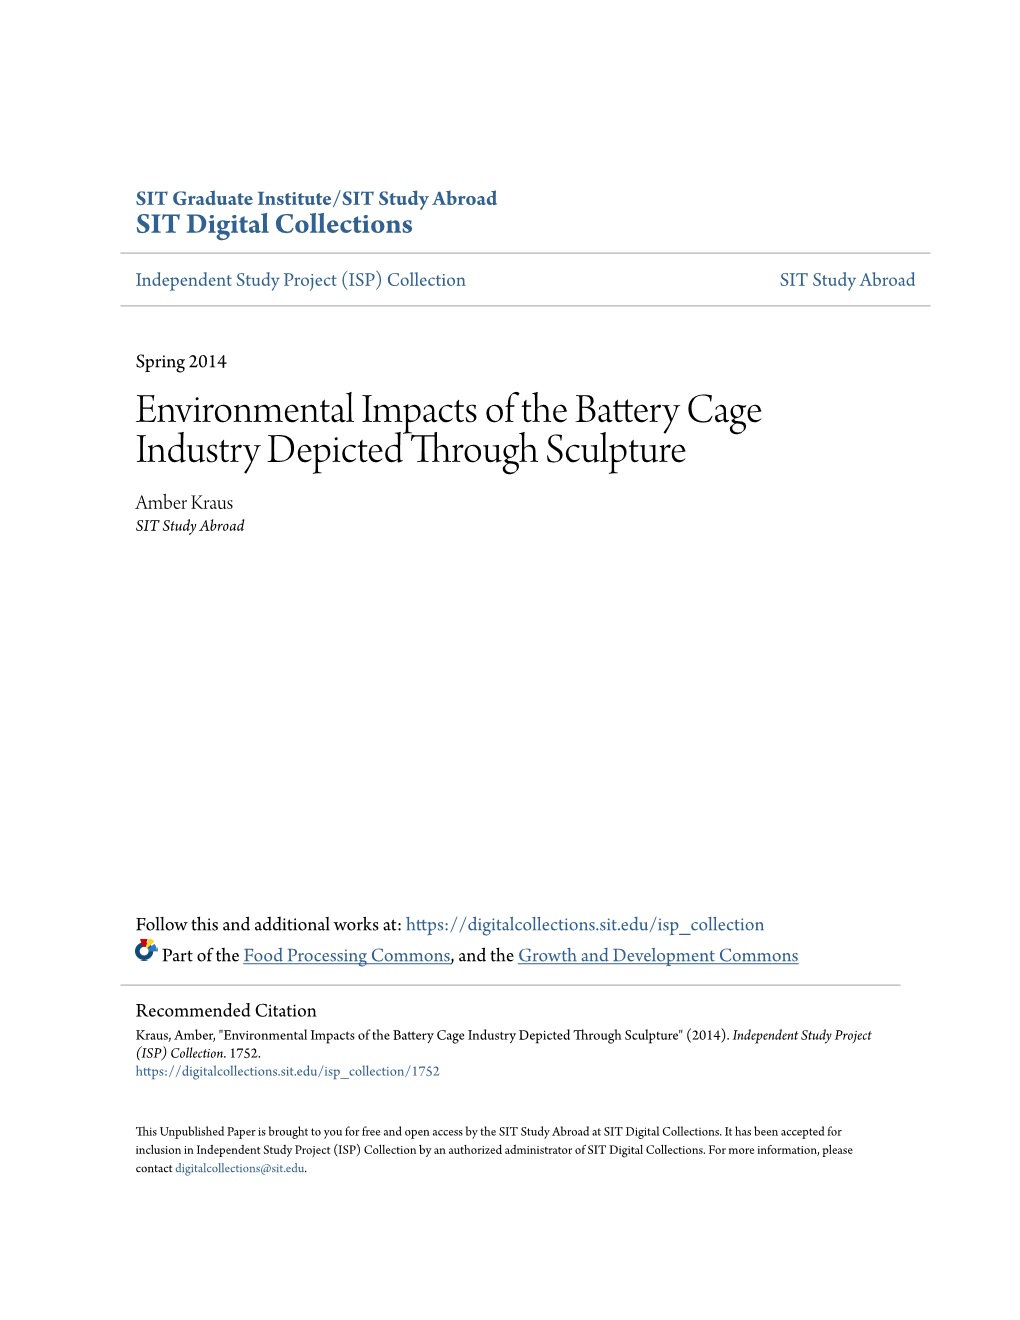 Environmental Impacts of the Battery Cage Industry Depicted Through Sculpture Amber Kraus SIT Study Abroad